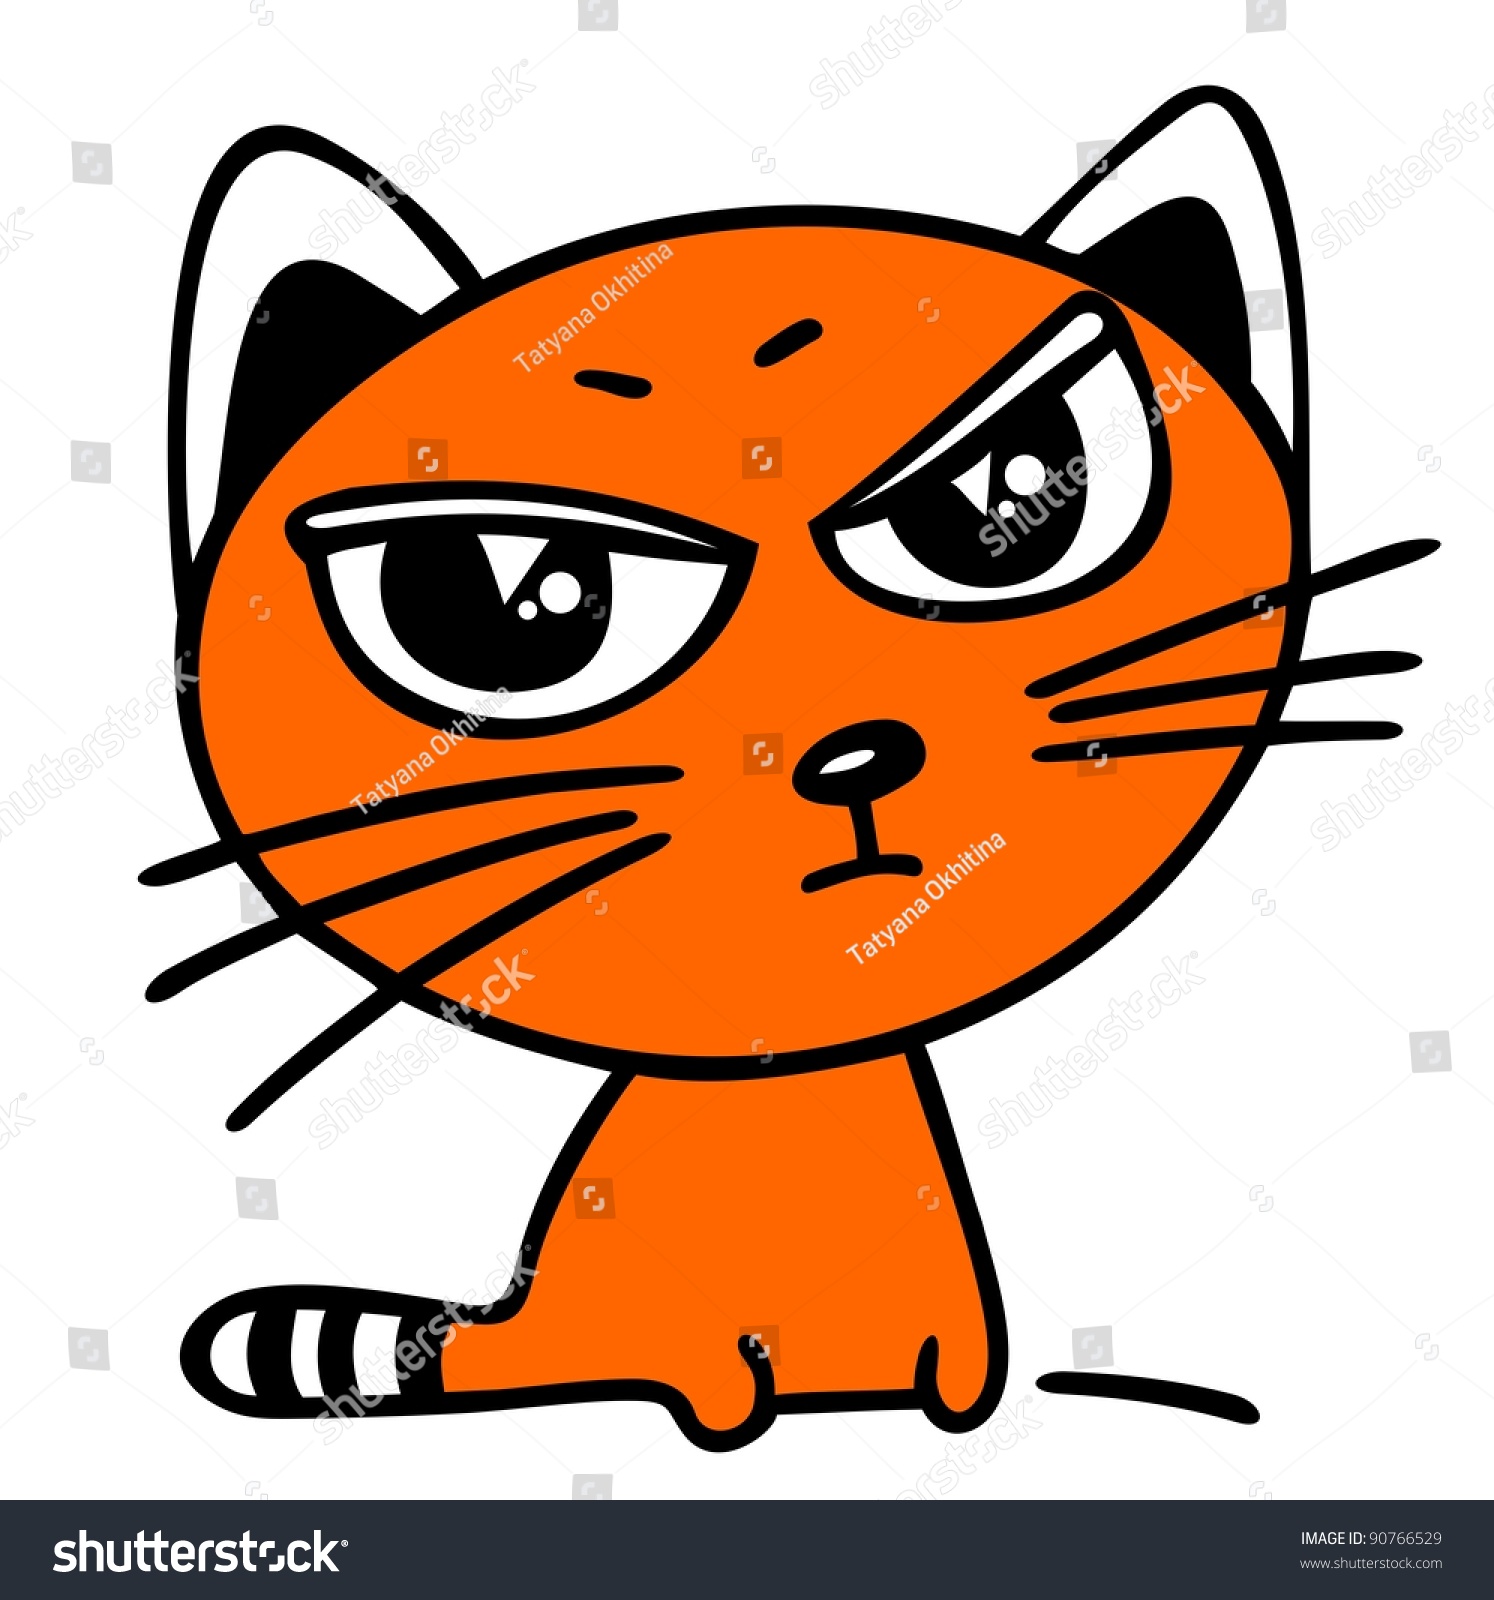 Cartoon Angry Cat Isolated On A White Background. Stock Photo 90766529